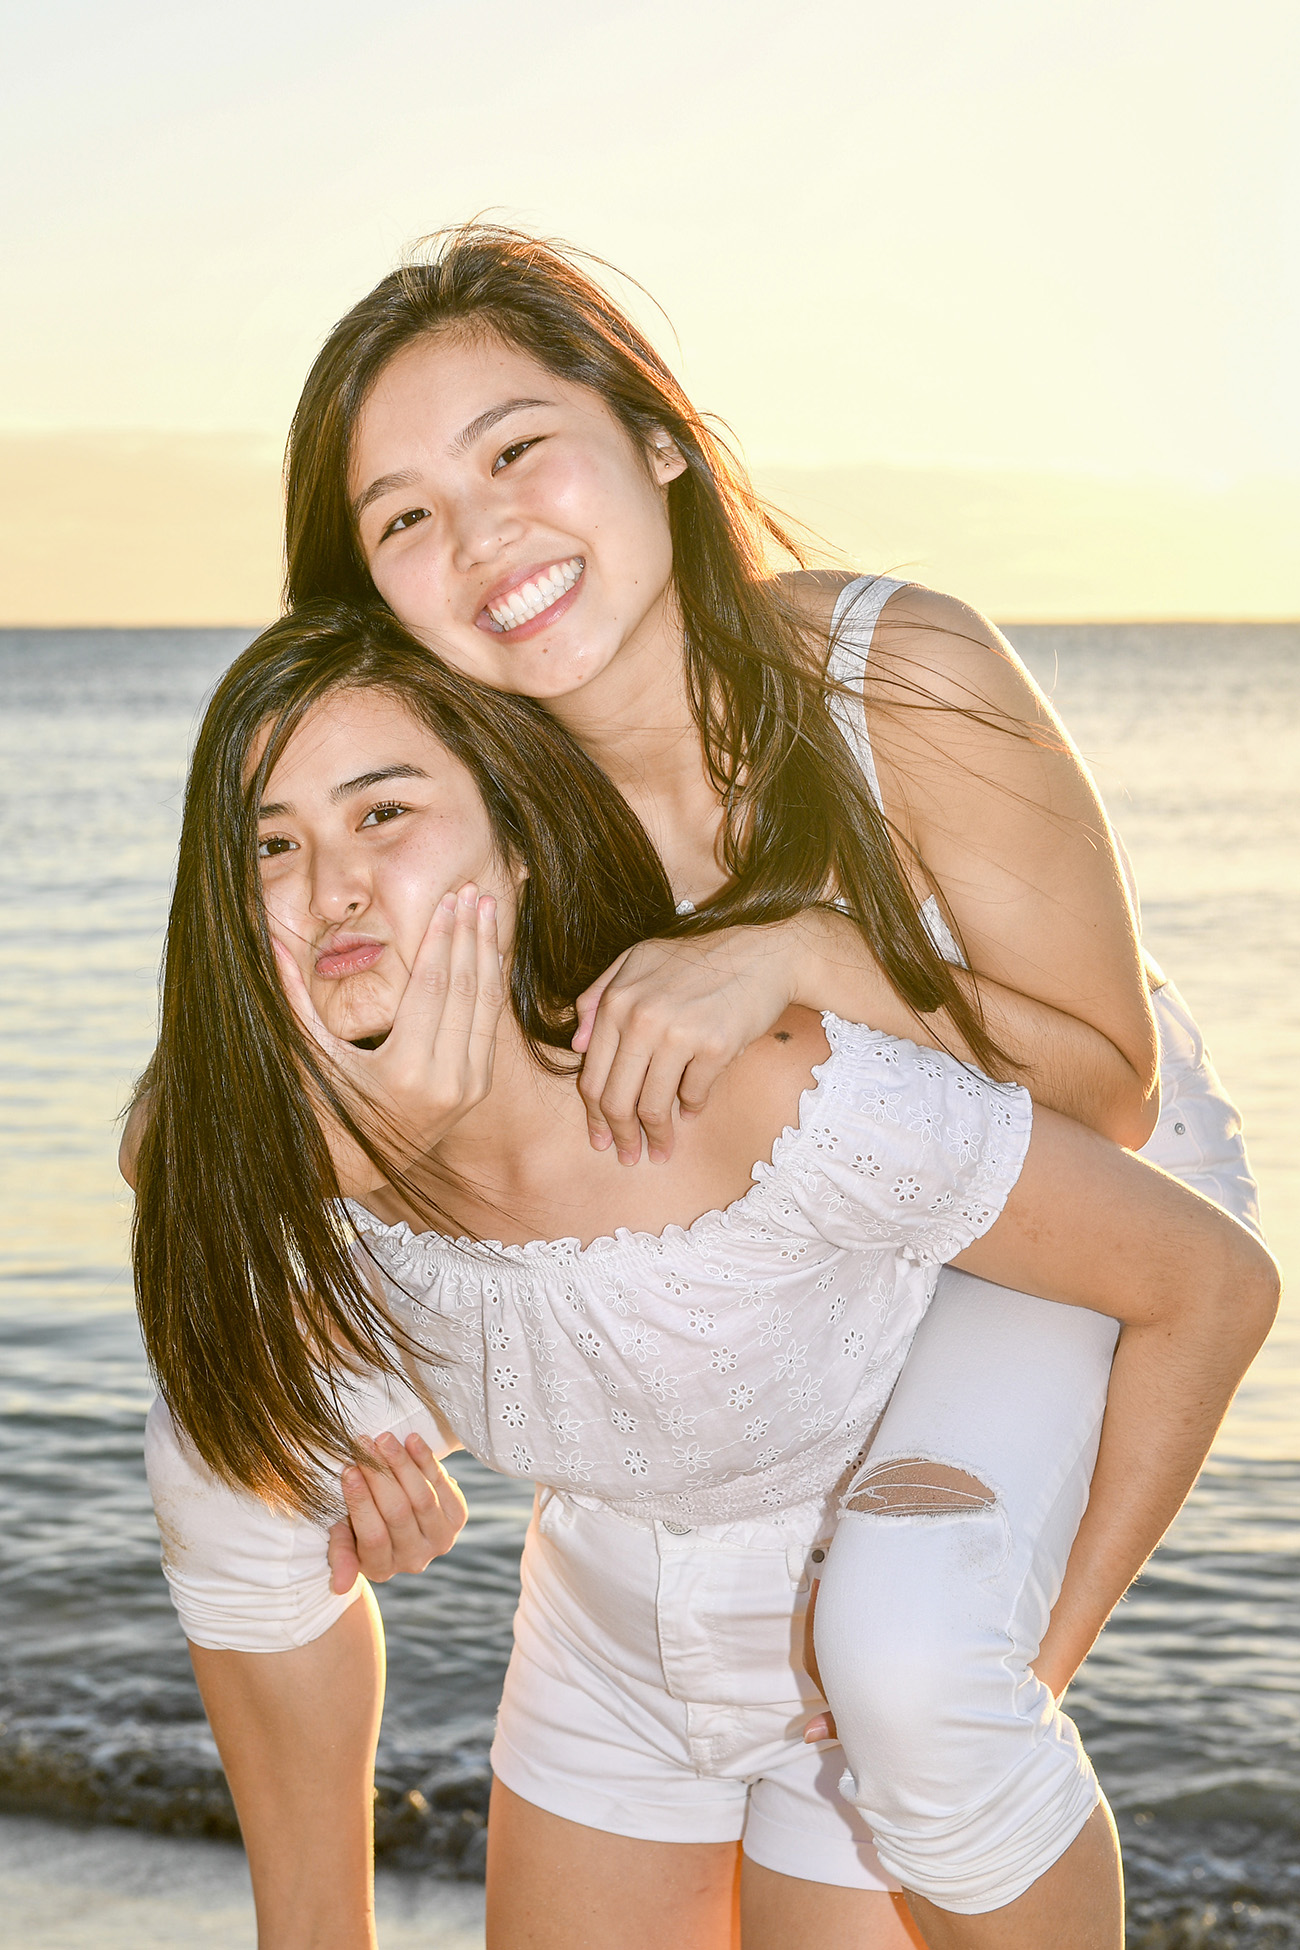 Asian sisters goof on the beach in the sunset